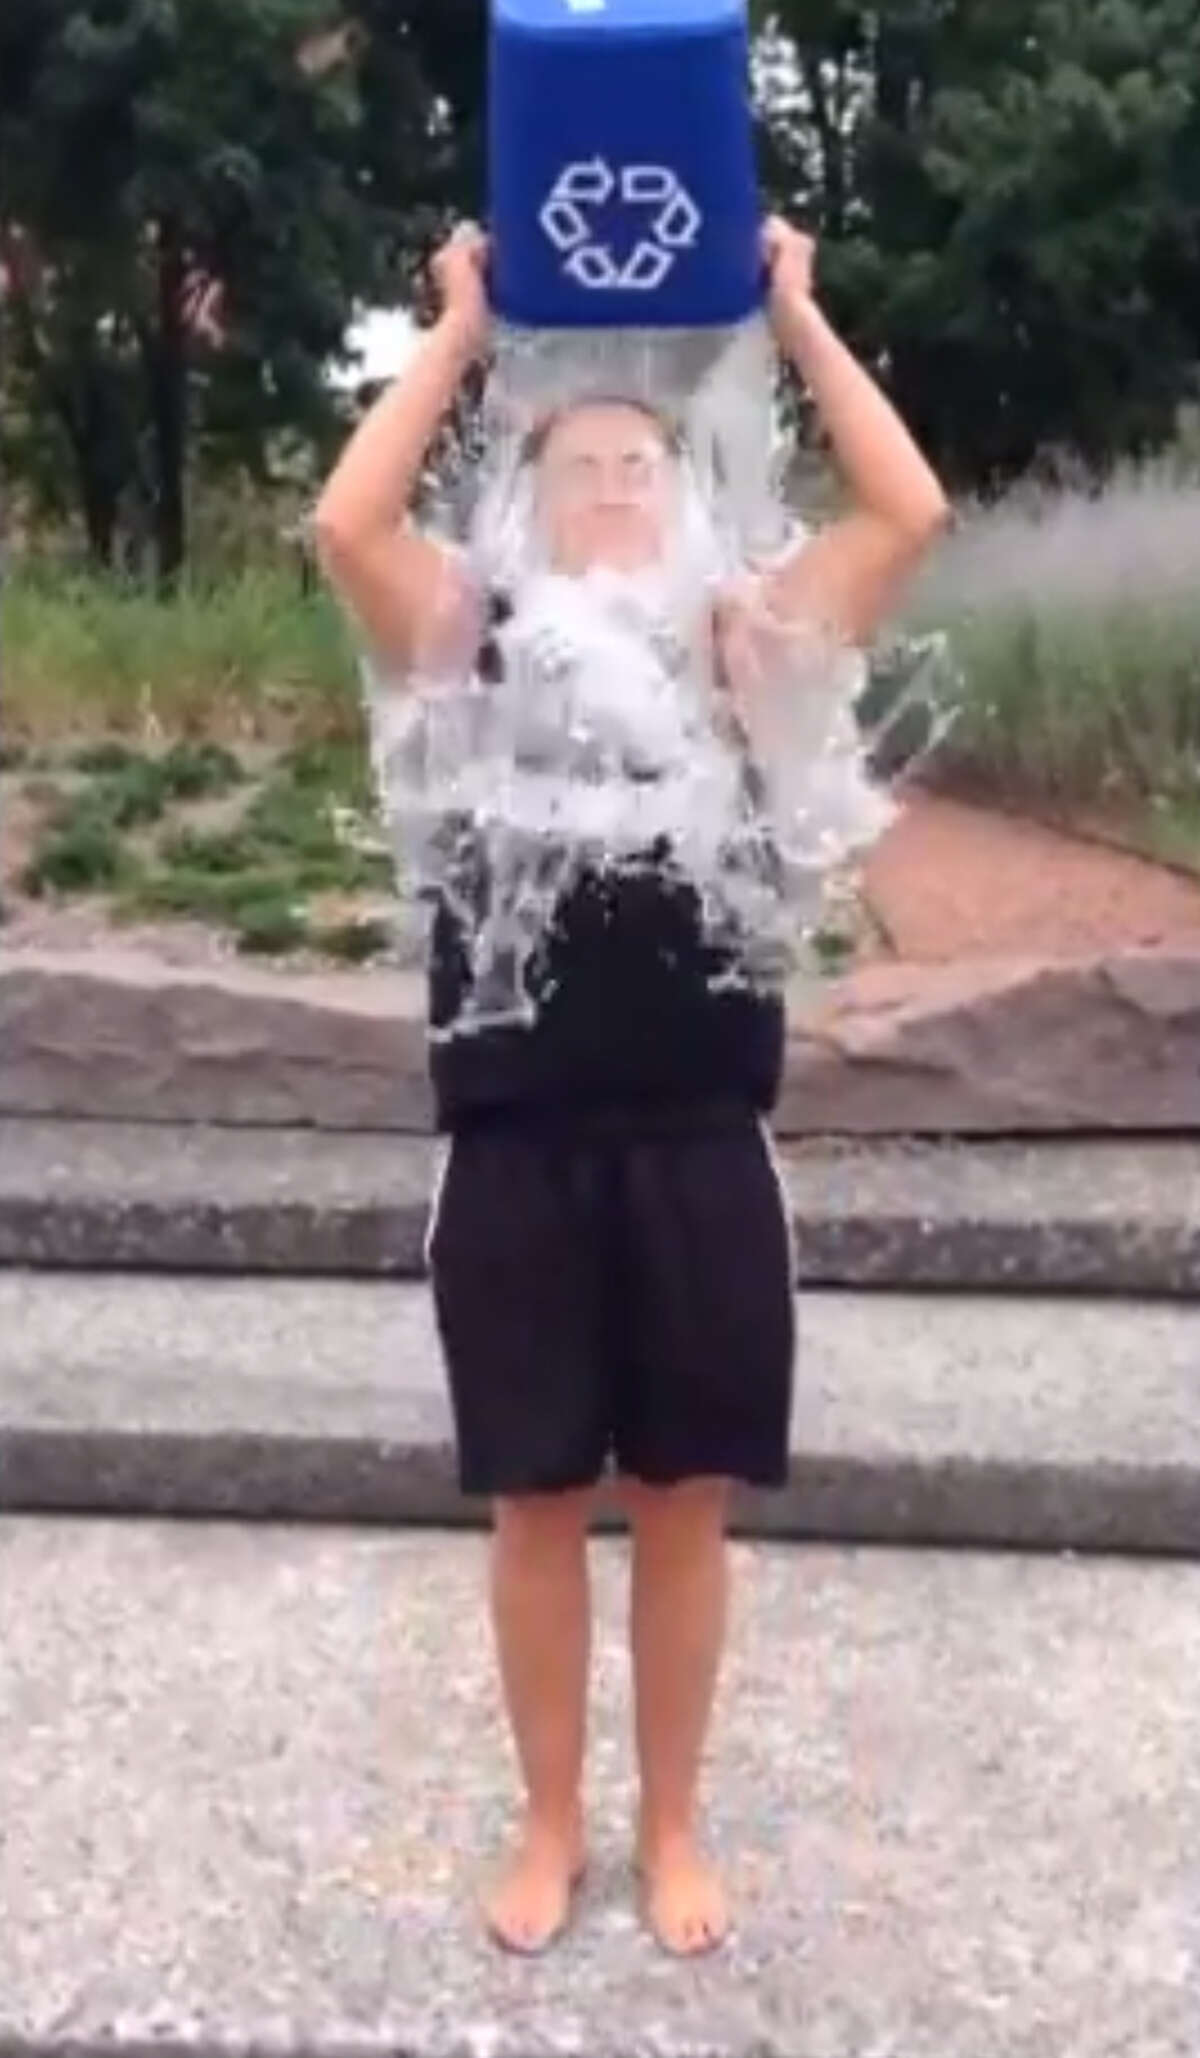 In this still from a video posted by the Spurs' Becky Hammon on YouTube, Hammon pours water on herself for the ice bucket challenge. San Antonians who opt to take the "ice bucket challenge" recently circulating on social media won't be posing a serious threat to local water supplies, officials say.